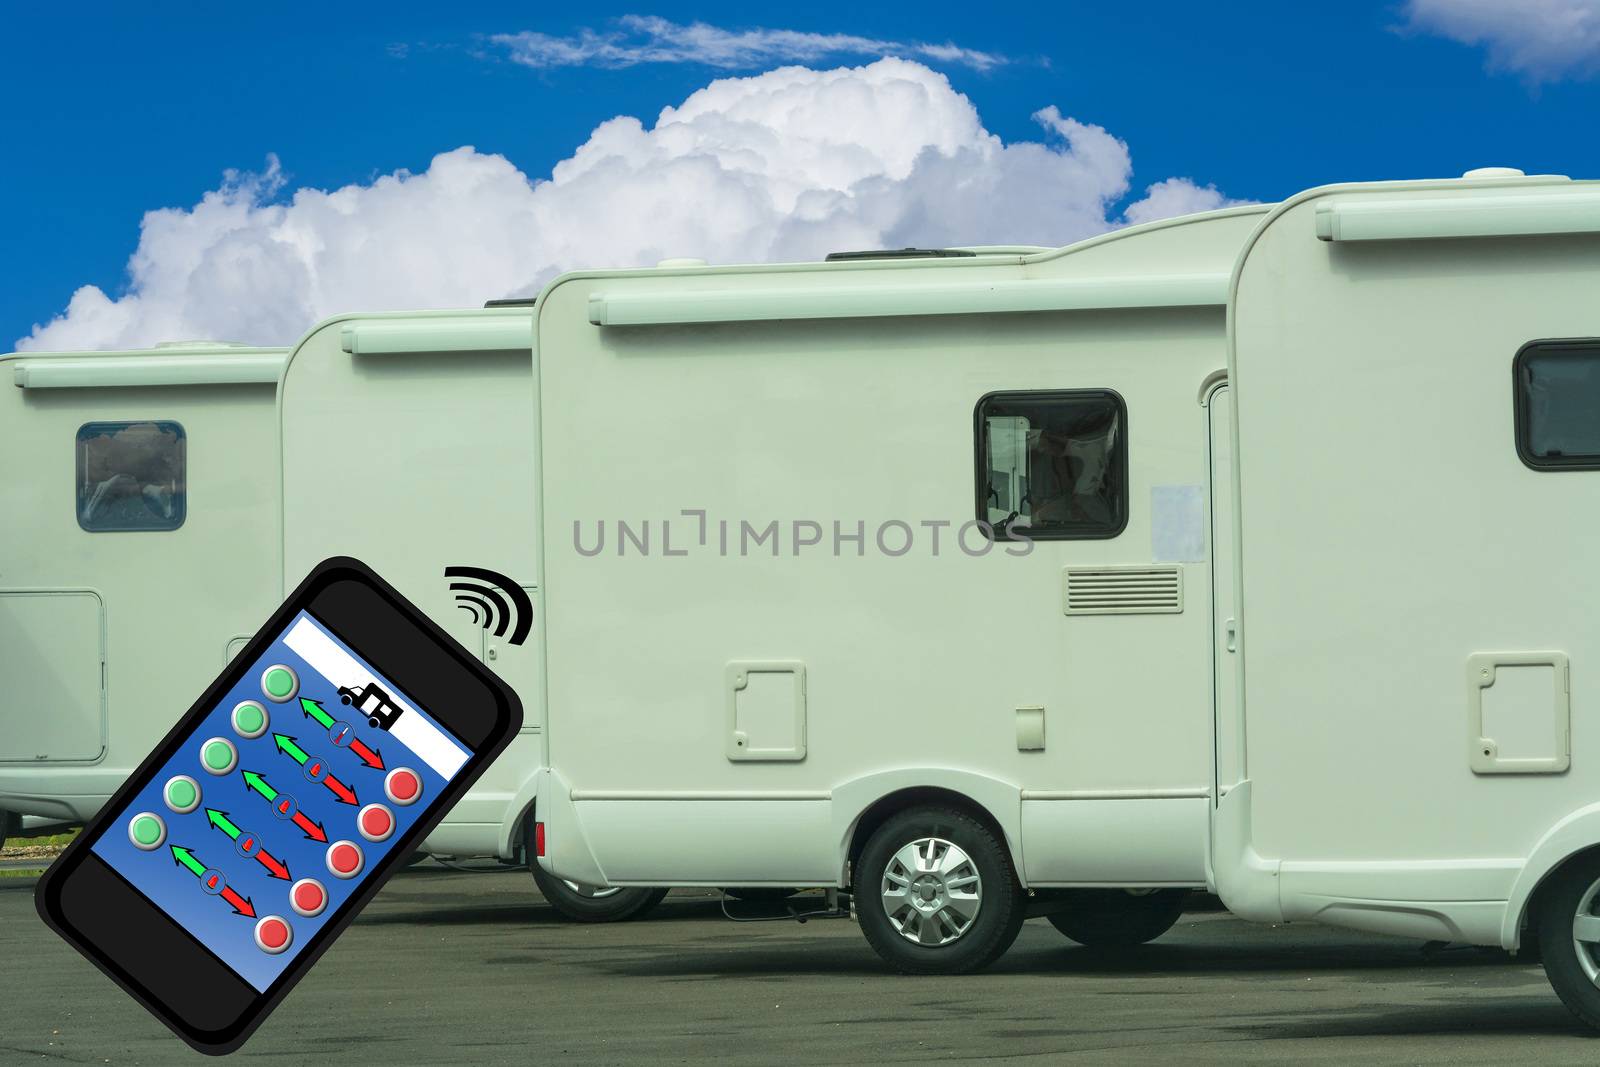 Mobile Smart Home, networked with camper